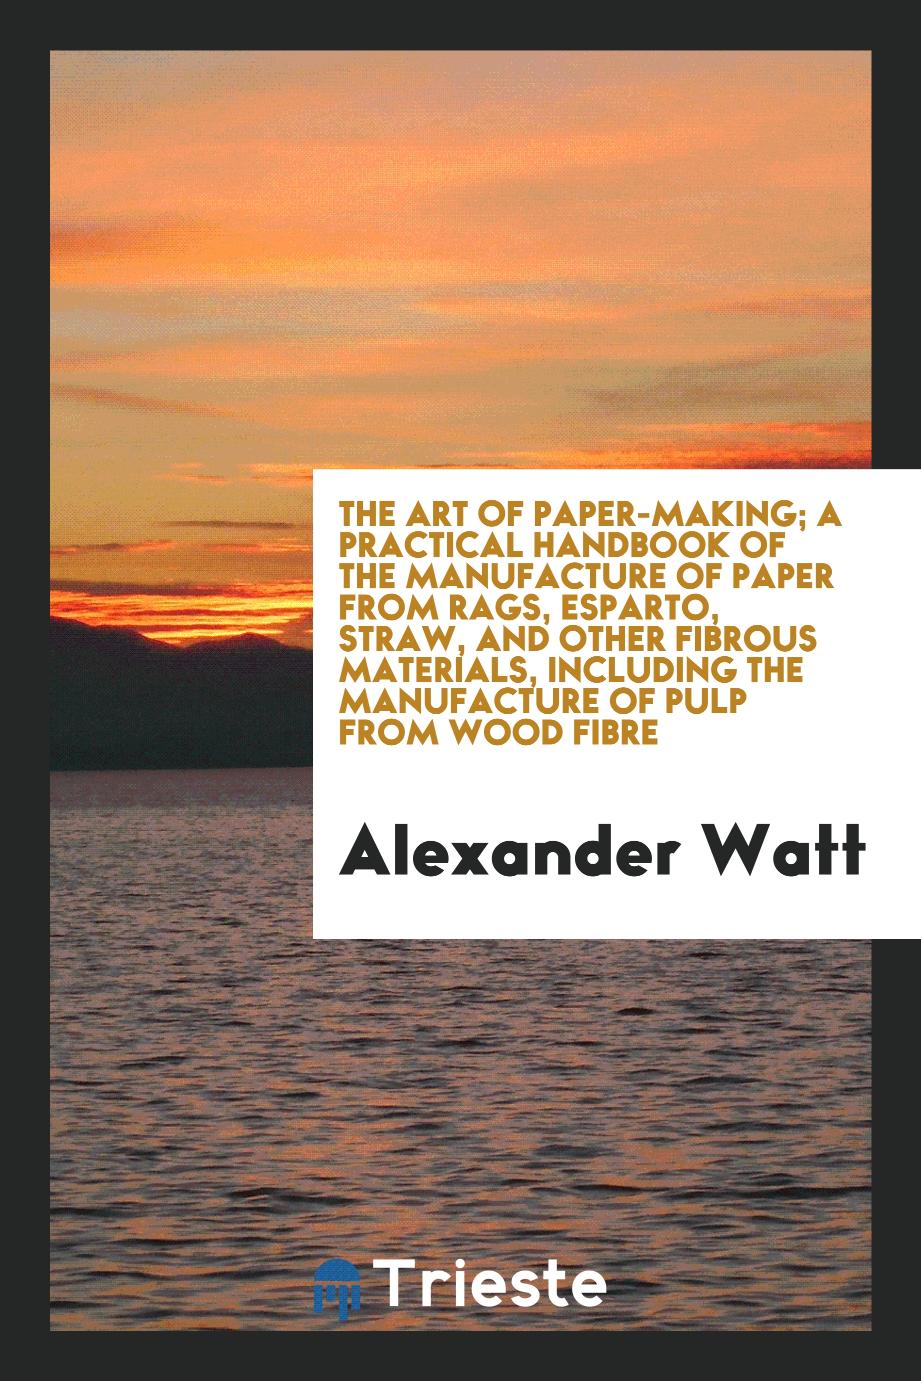 The art of paper-making; a practical handbook of the manufacture of paper from rags, esparto, straw, and other fibrous materials, including the manufacture of pulp from wood fibre